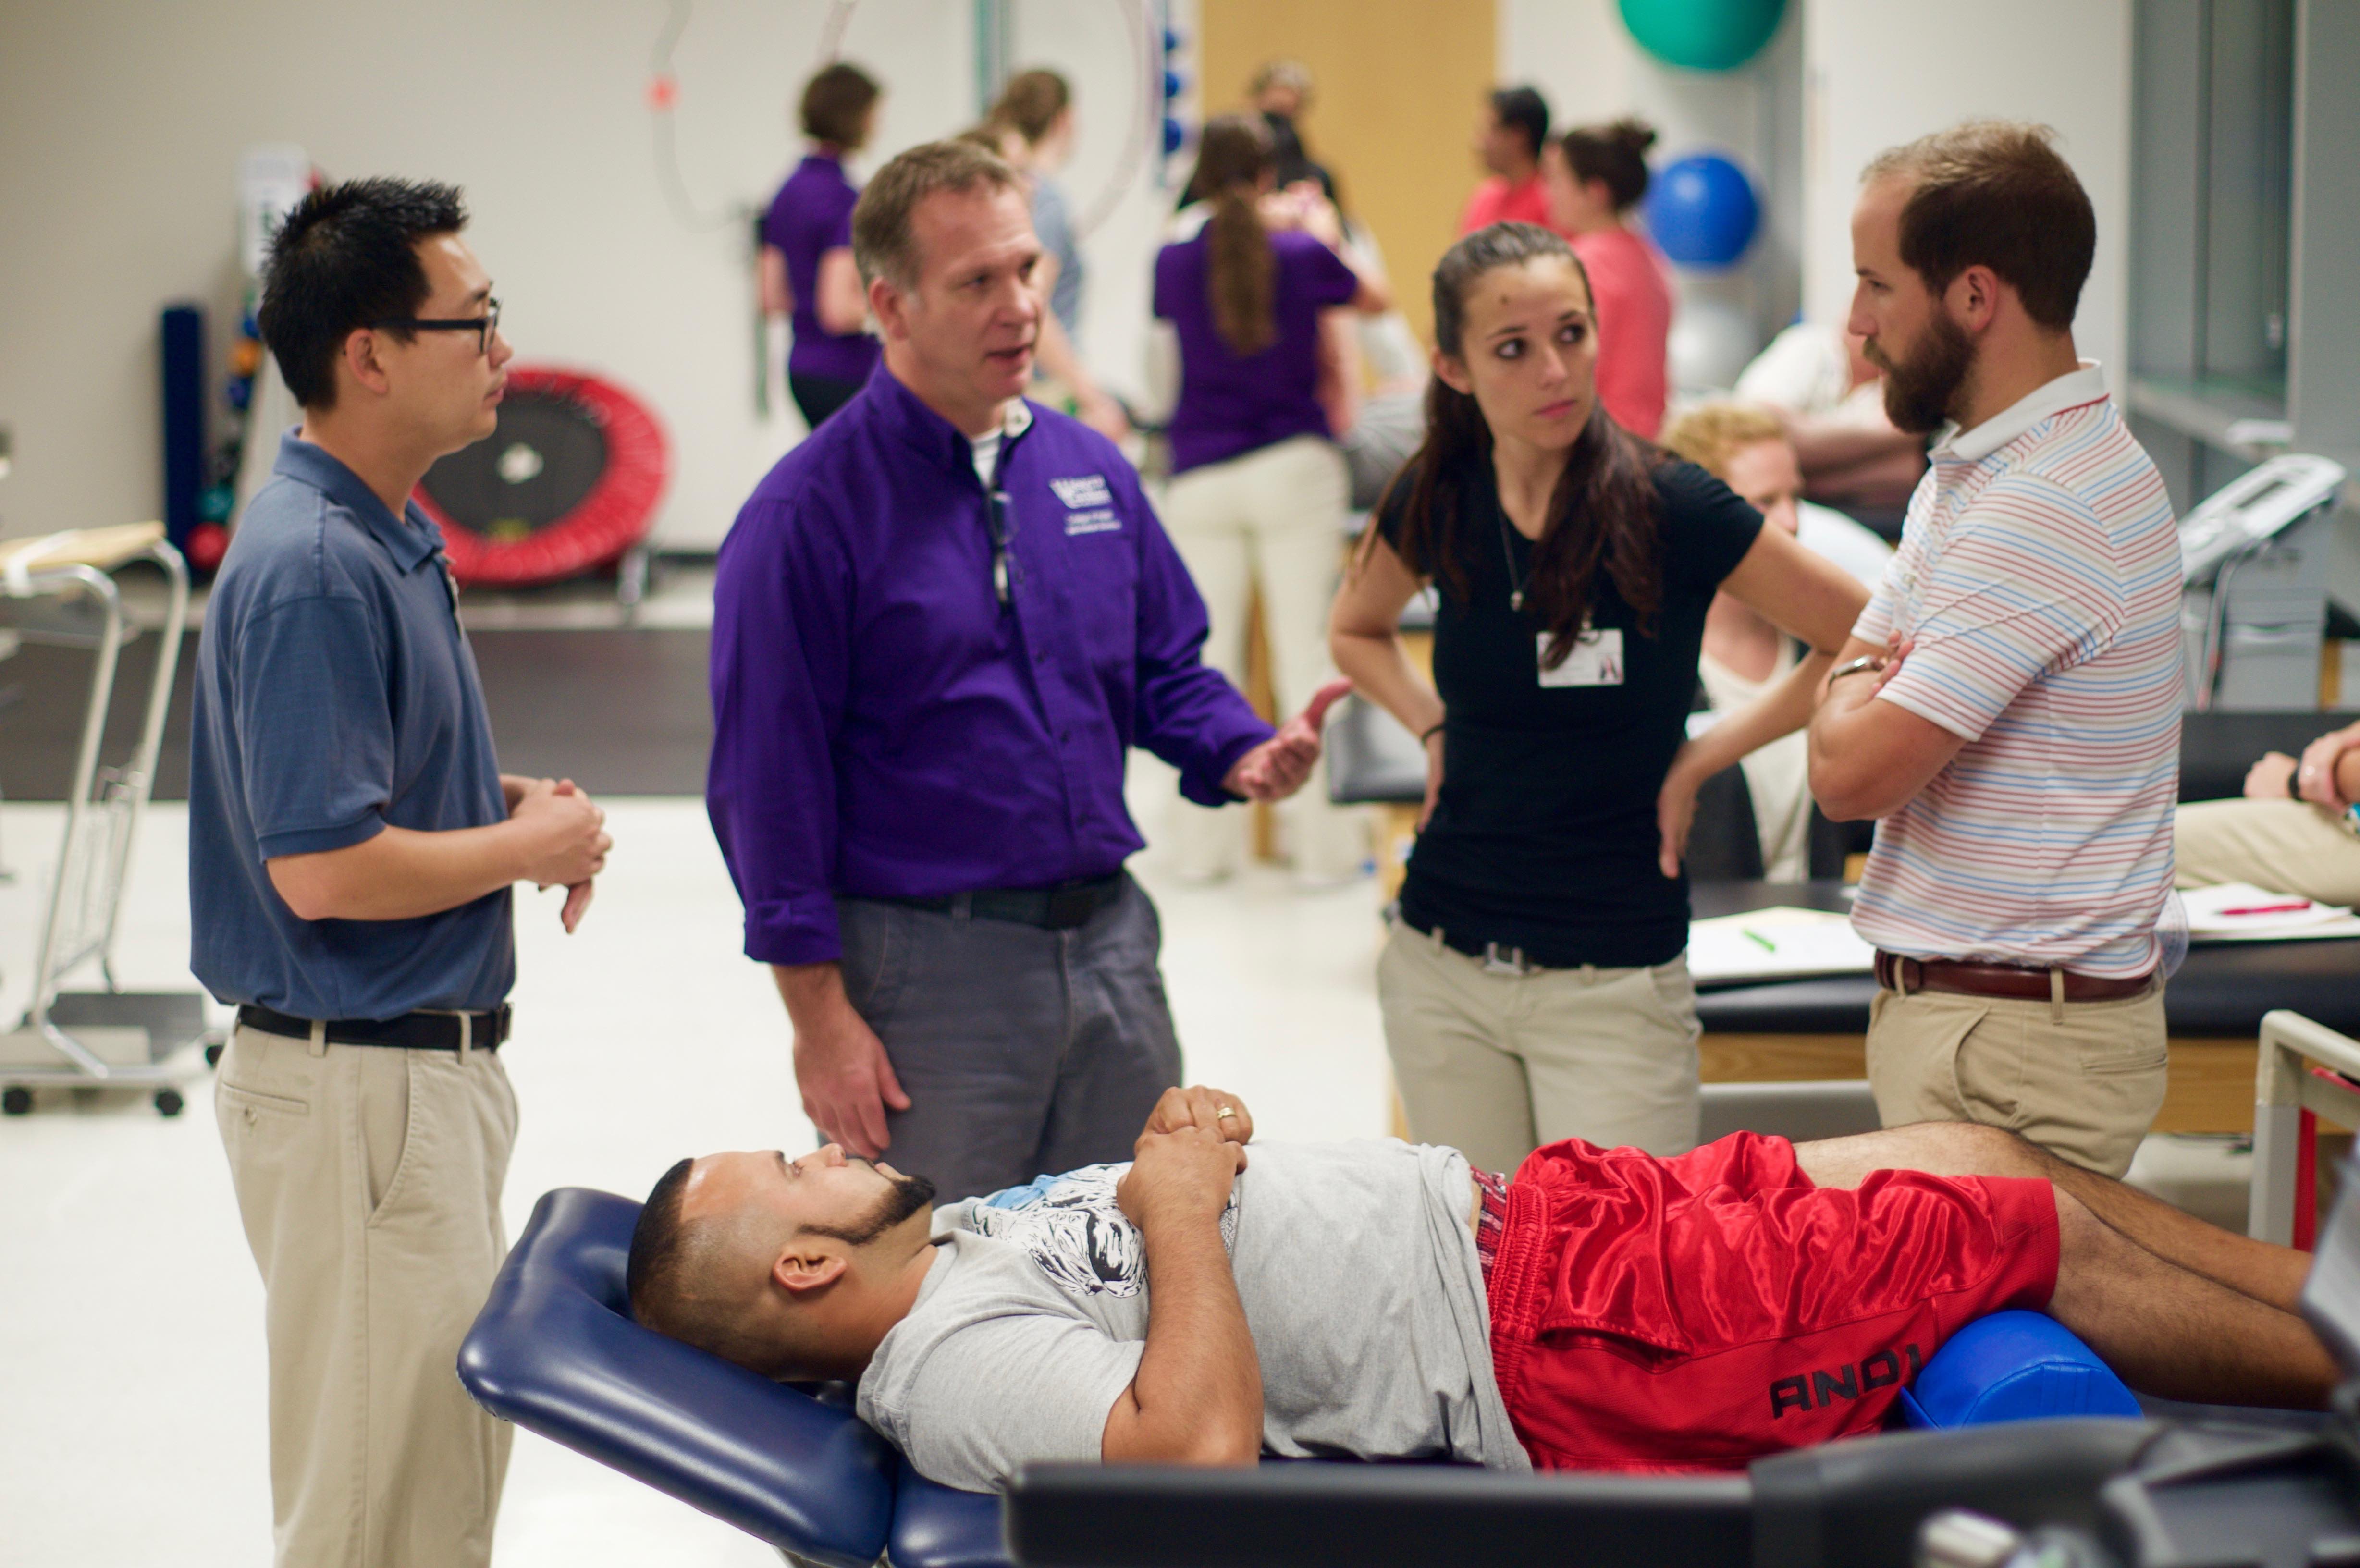 Doctor of Physical Therapy students working in the pro-bono clinic